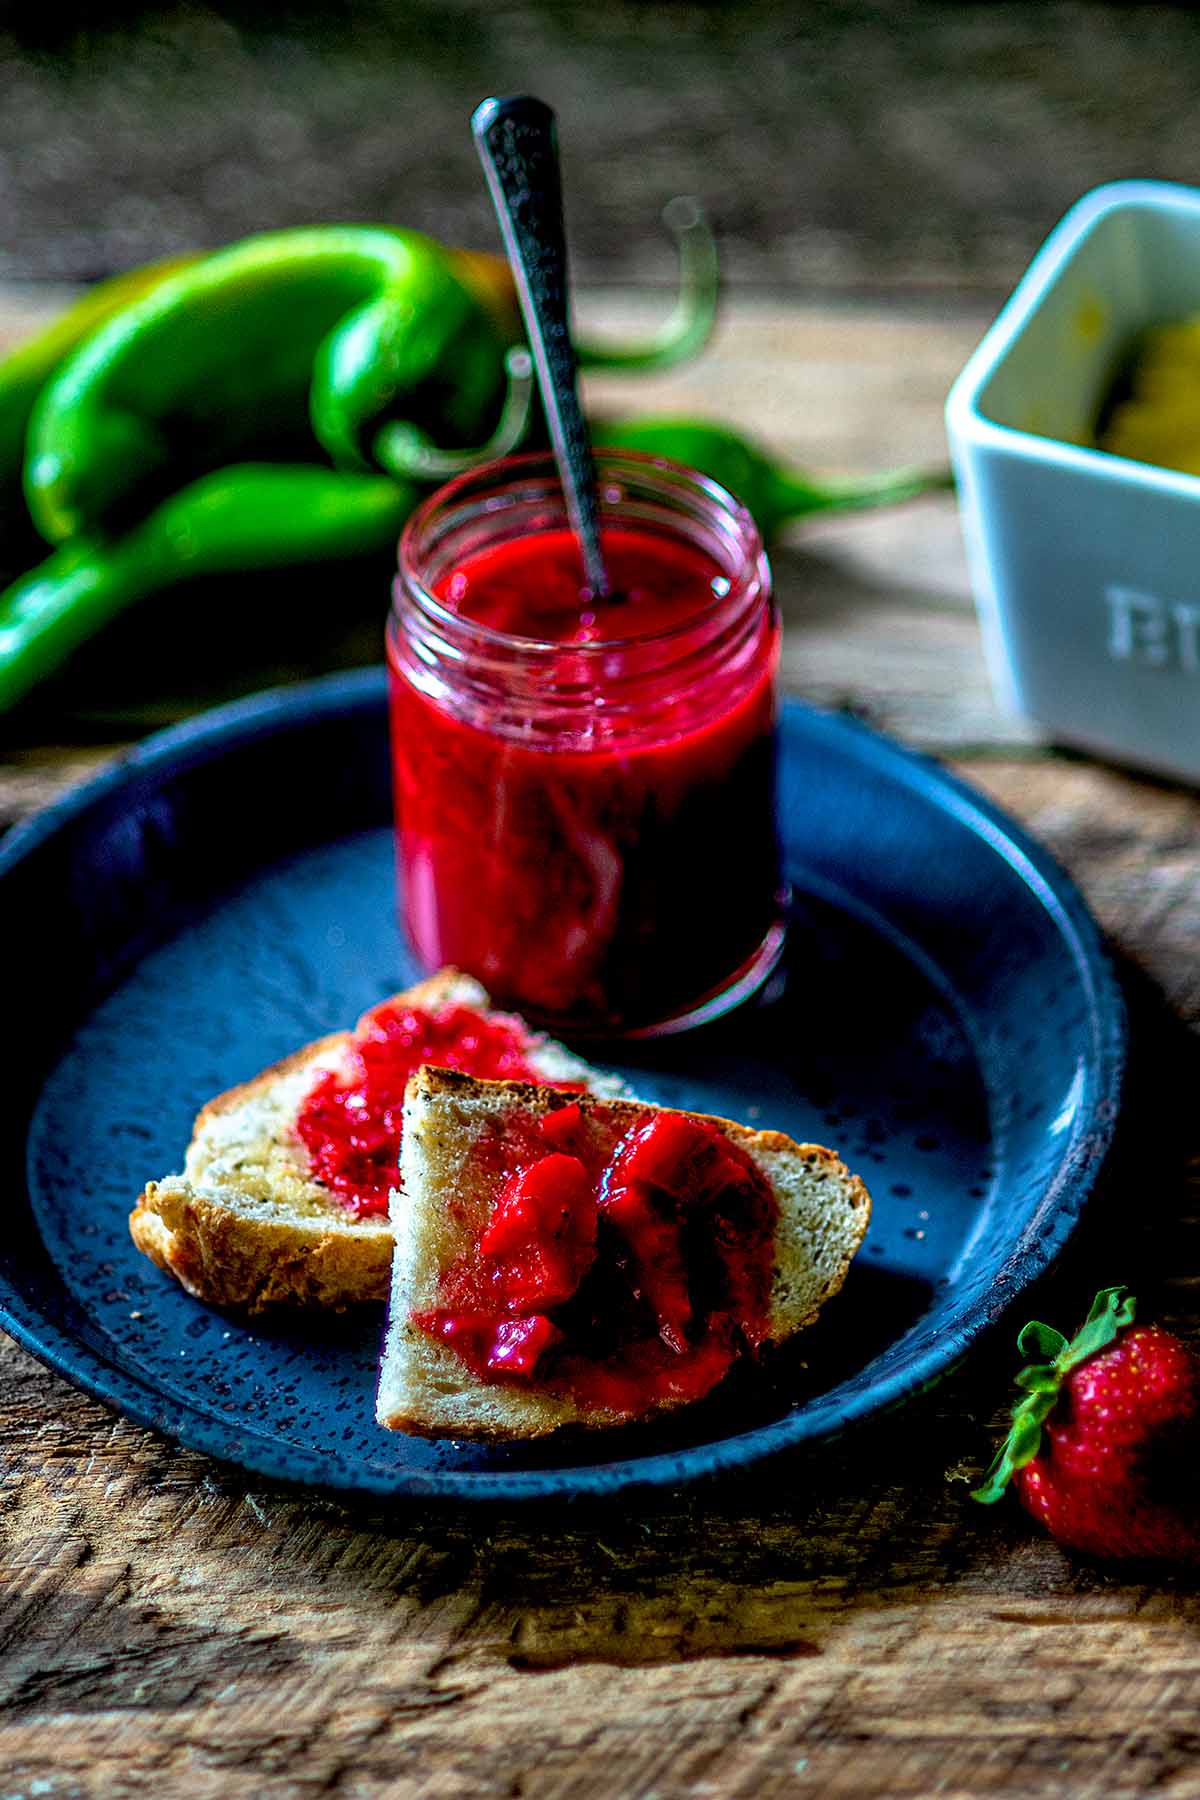 Strawberry Rhubarb Hatch Green Chile Reduction served on toast with a jar and spreader.